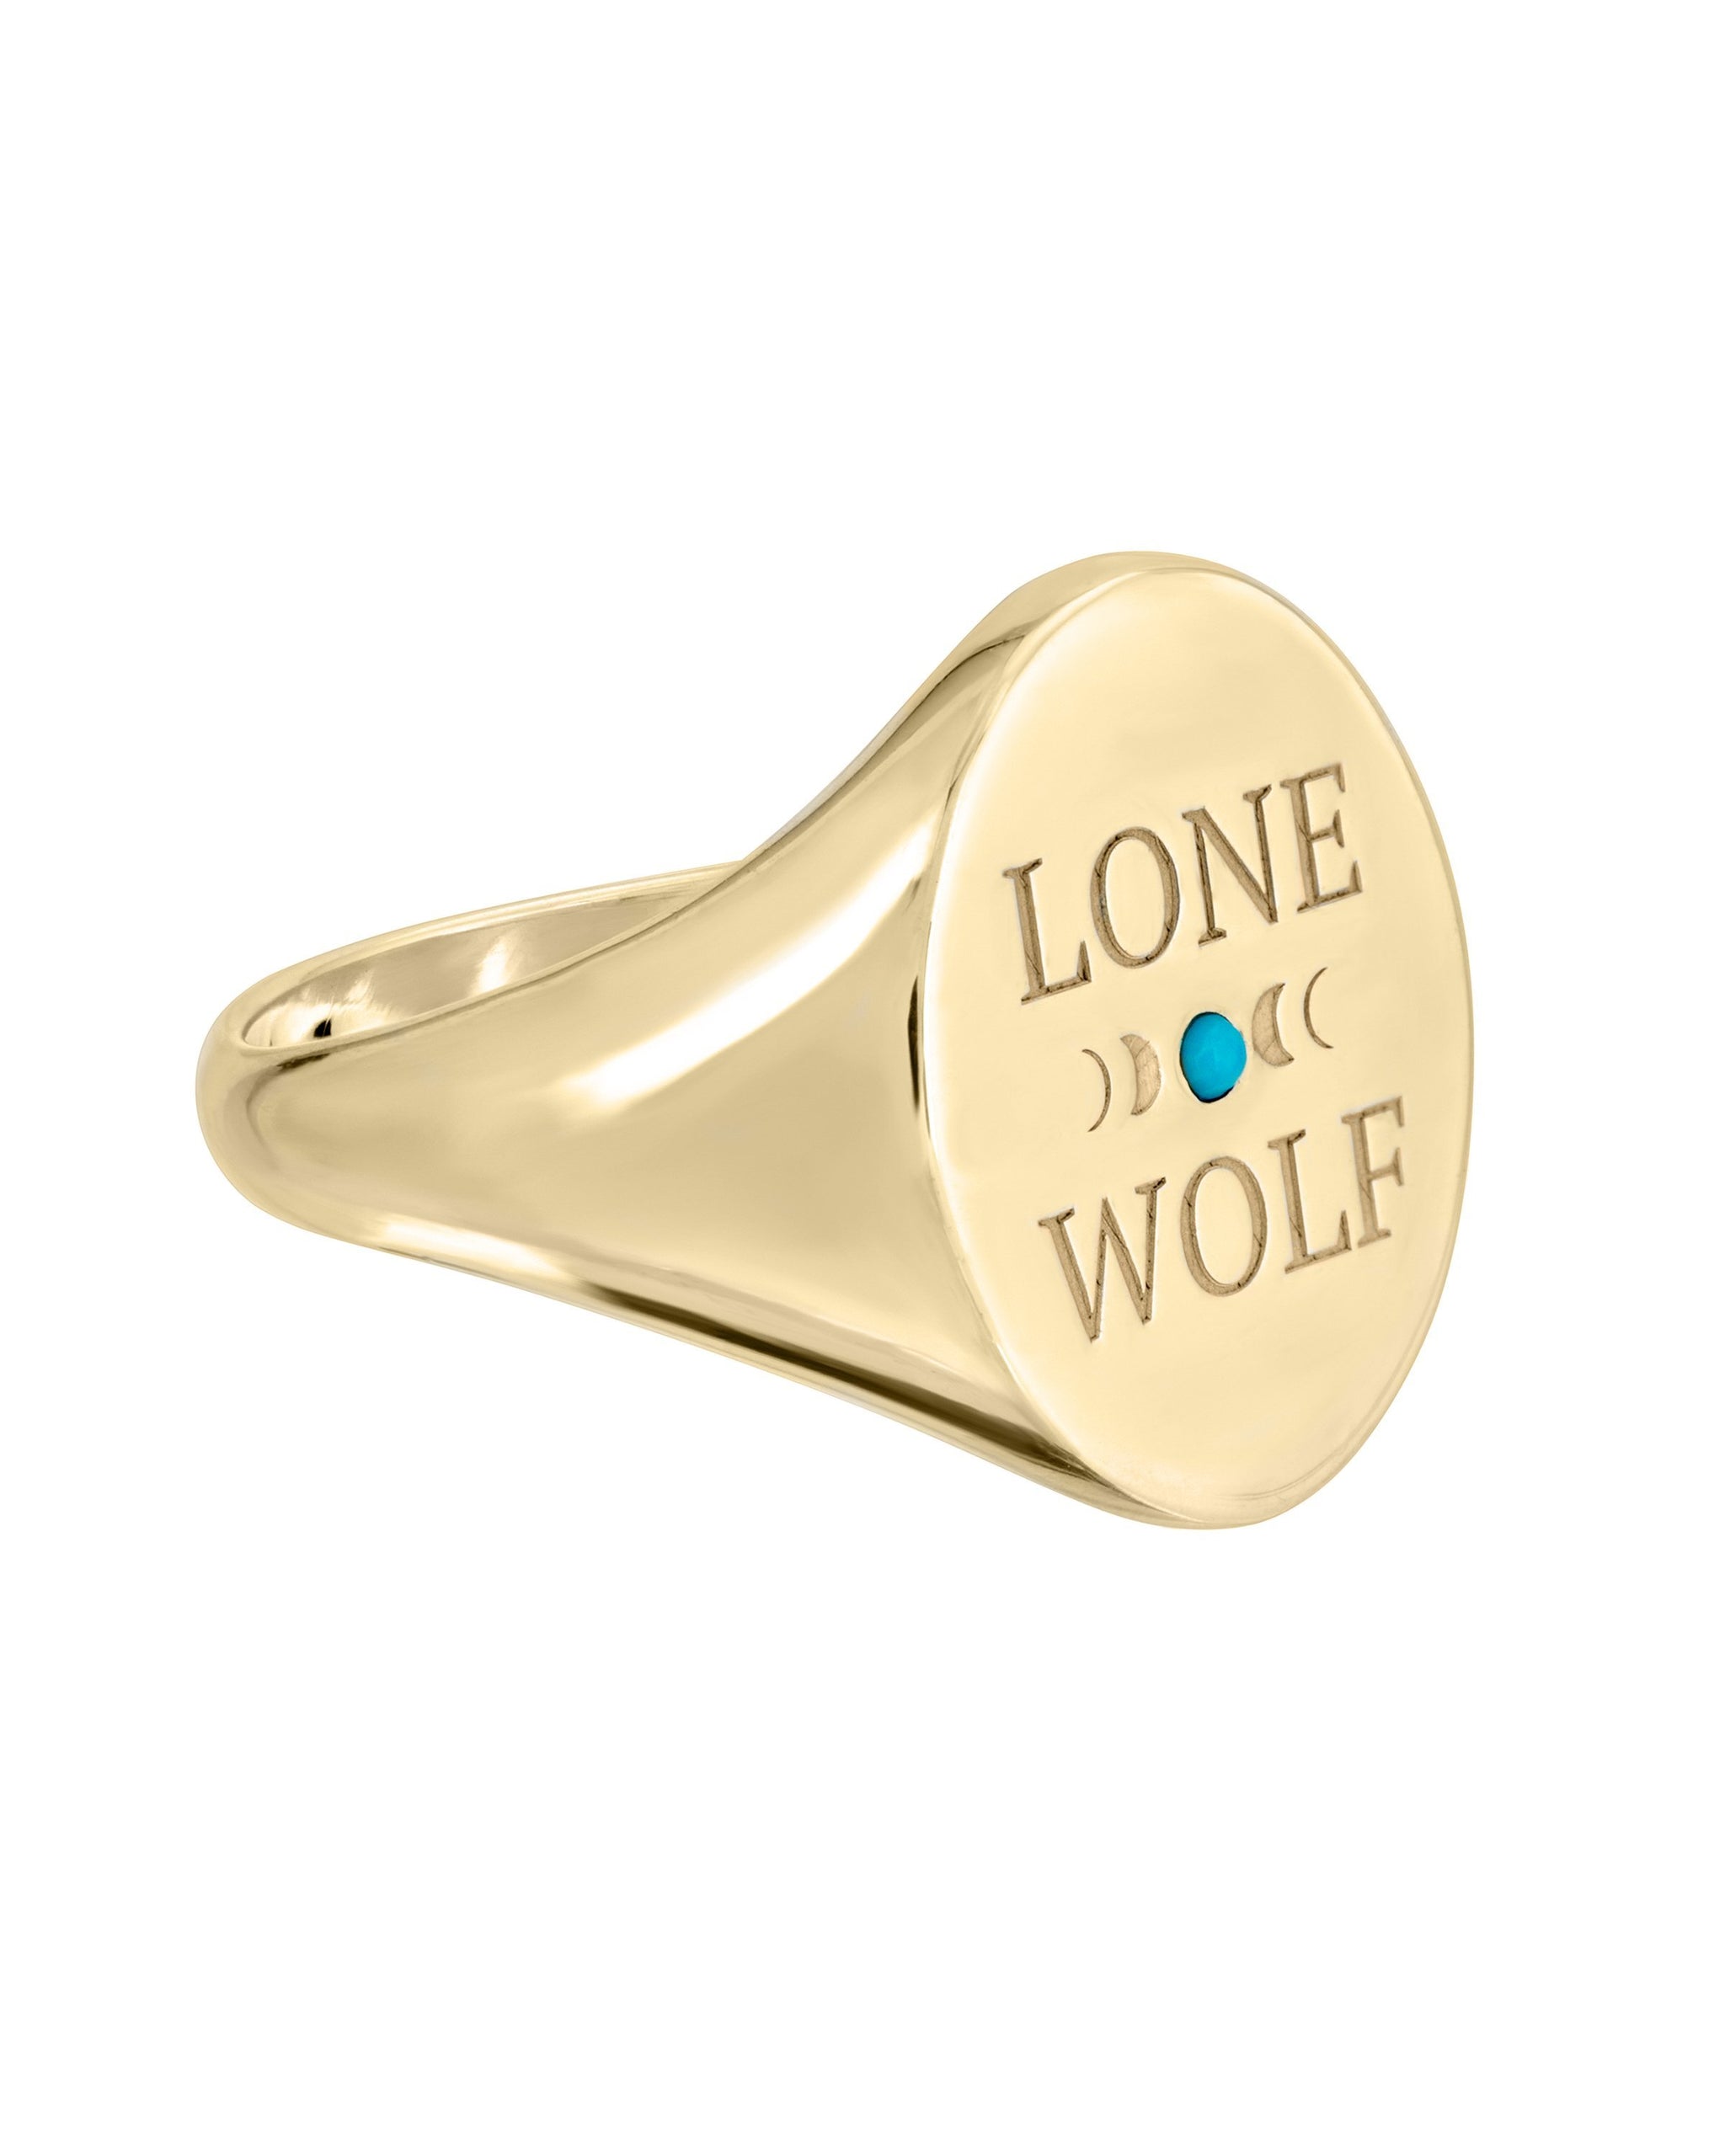 Lone Wolf Ring, 14k Gold Vermeil Oval Signet Ring  Edit alt text